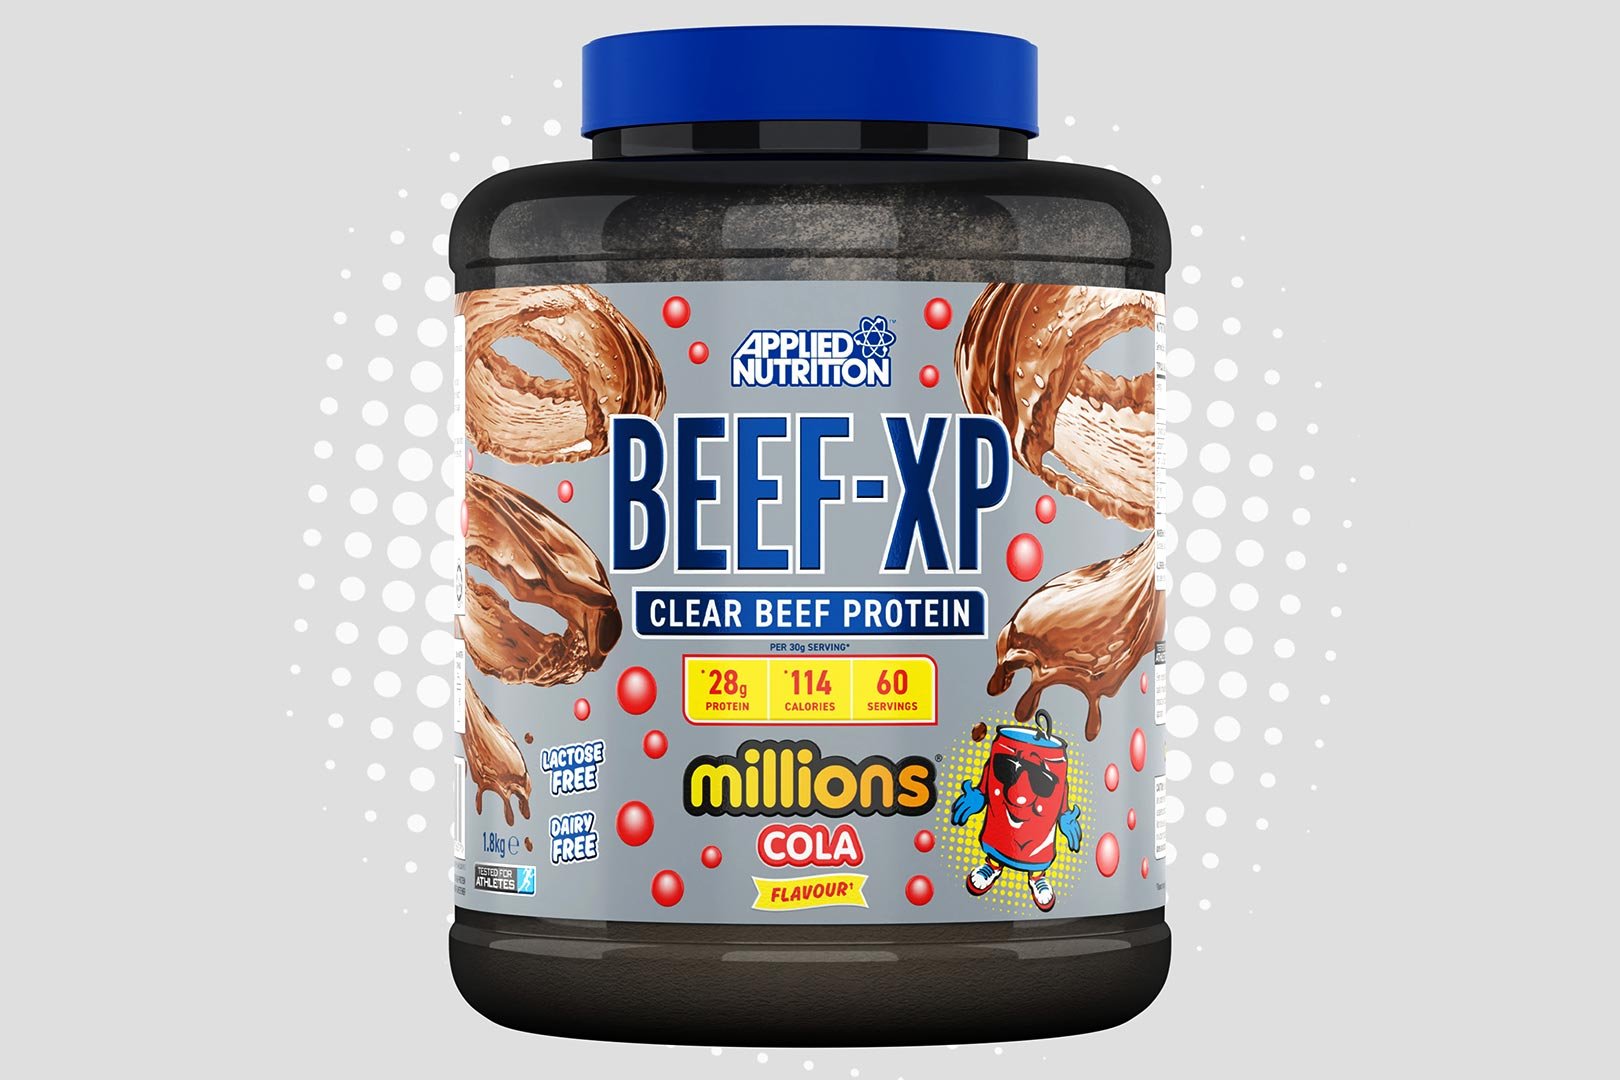 Applied Nutrition Millions Cola Beef Xp